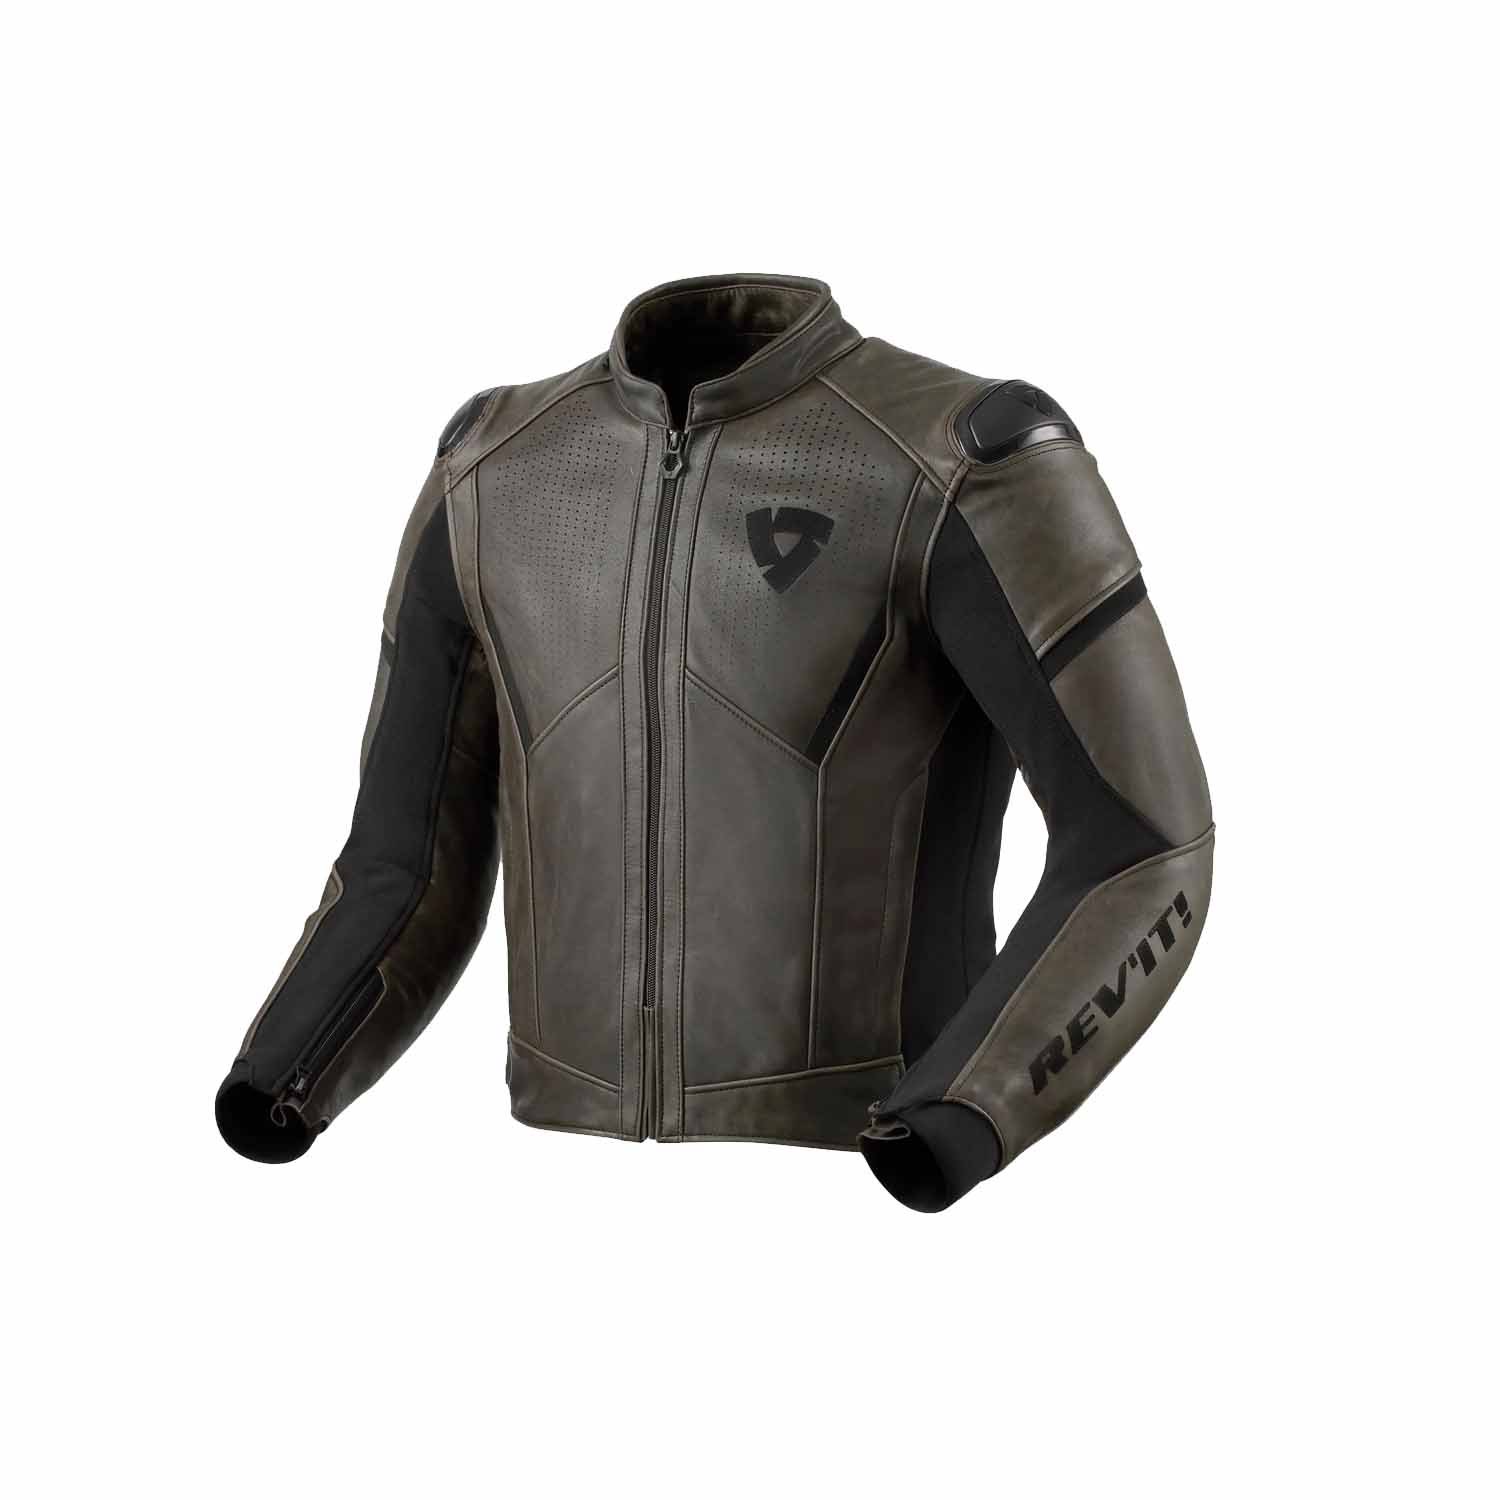 Image of EU REV'IT! Parallax Jacket Black Olive Taille 50